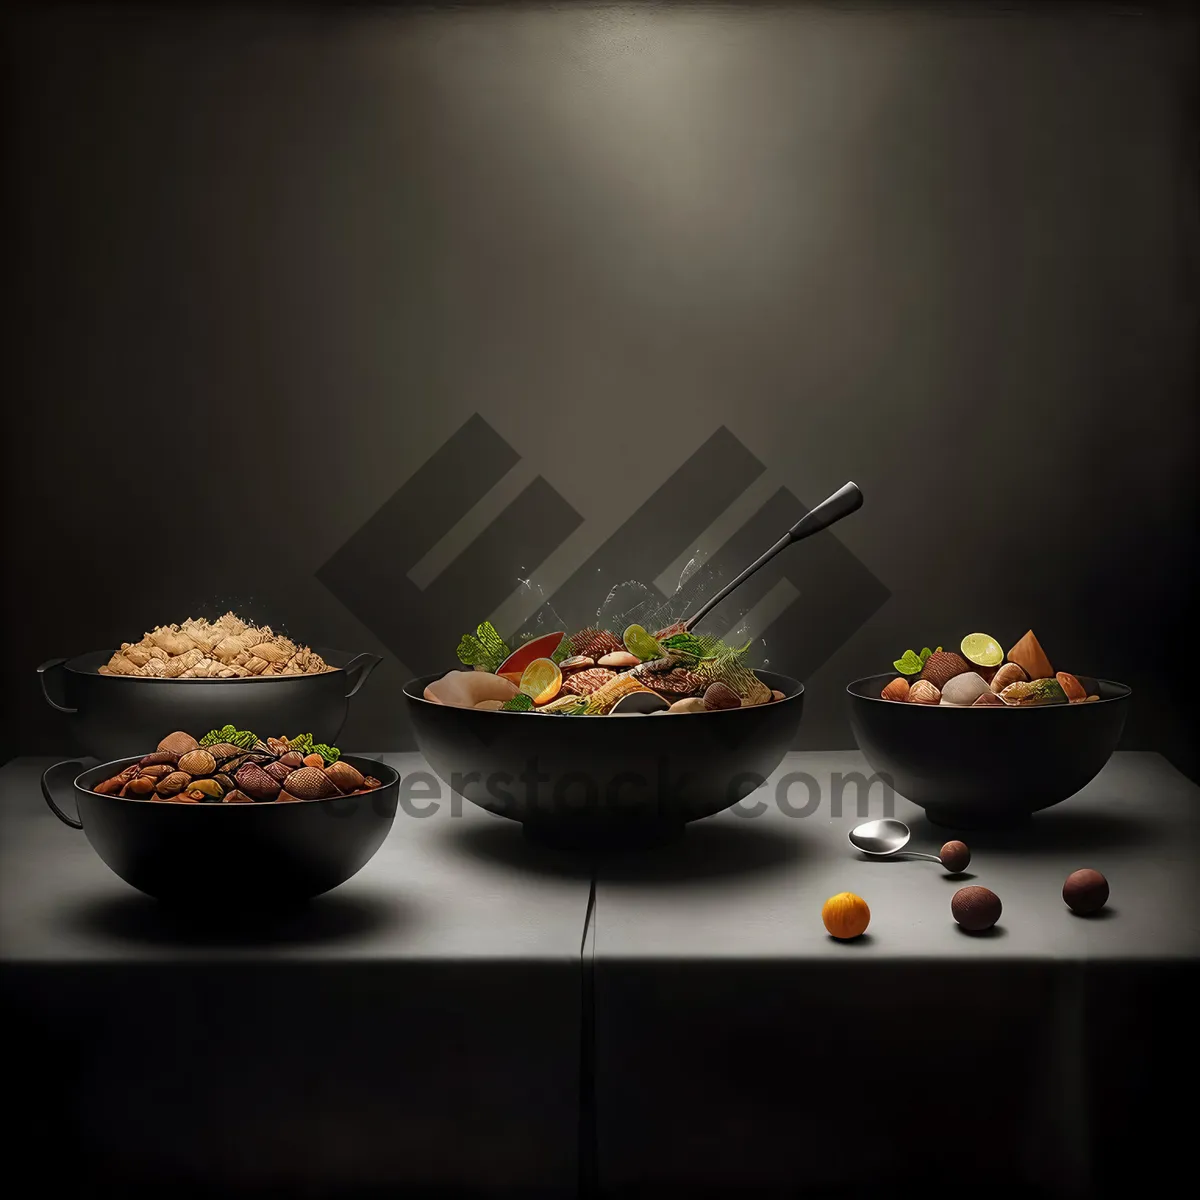 Picture of Hot and Healthy Cooking Utensils: Wok, Pan, Cup, Bowl, Glass